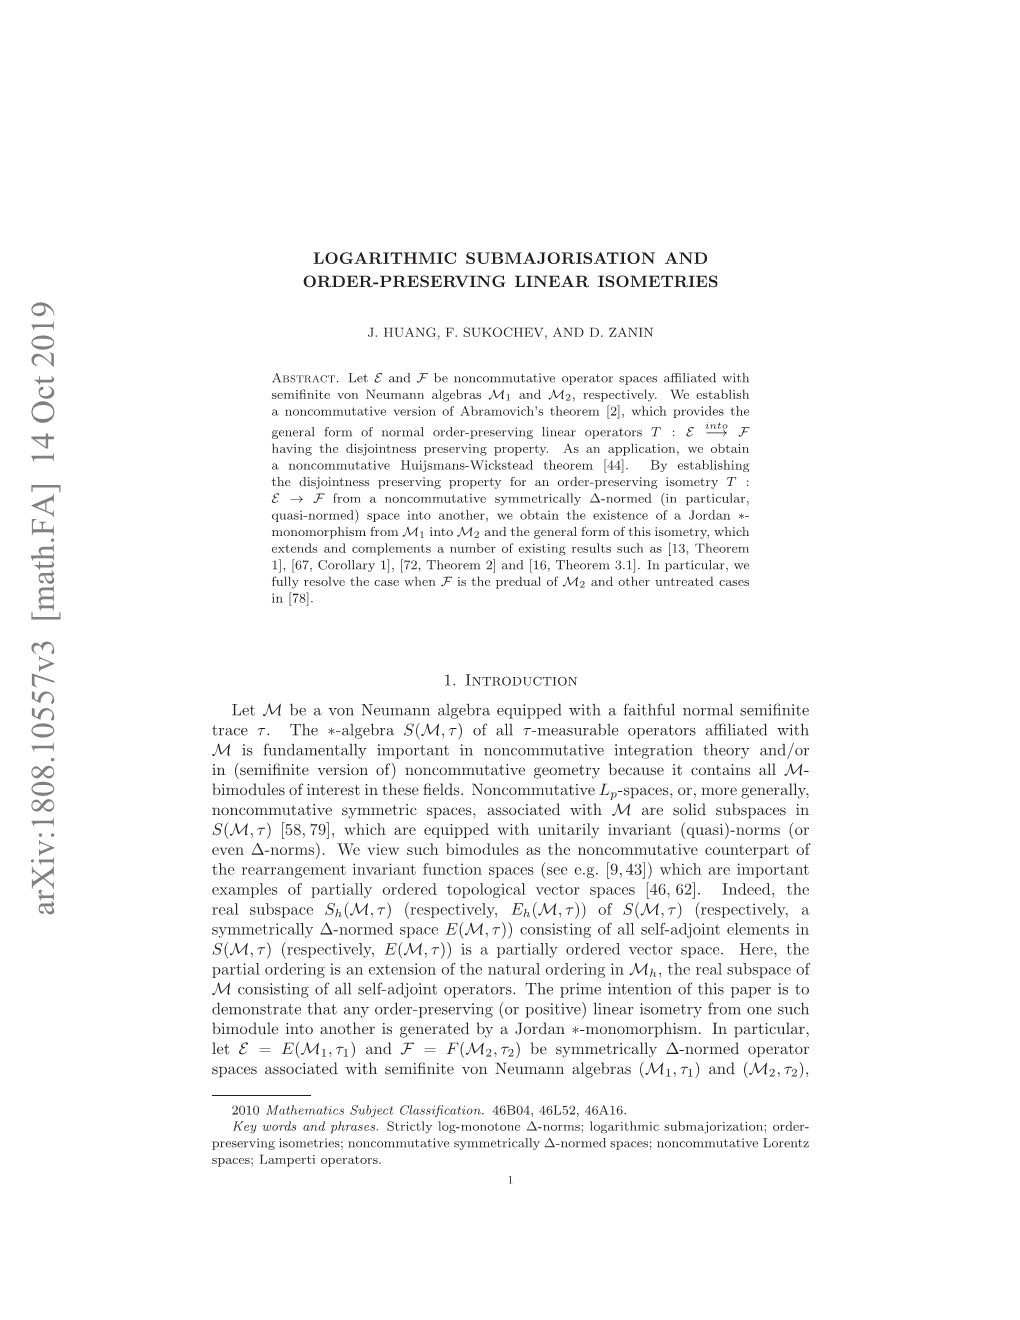 LOGARITHMIC SUBMAJORISATION and ORDER-PRESERVING LINEAR ISOMETRIES 3 for Symmetric Spaces Aﬃliated with Speciﬁc Semiﬁnite Algebras)